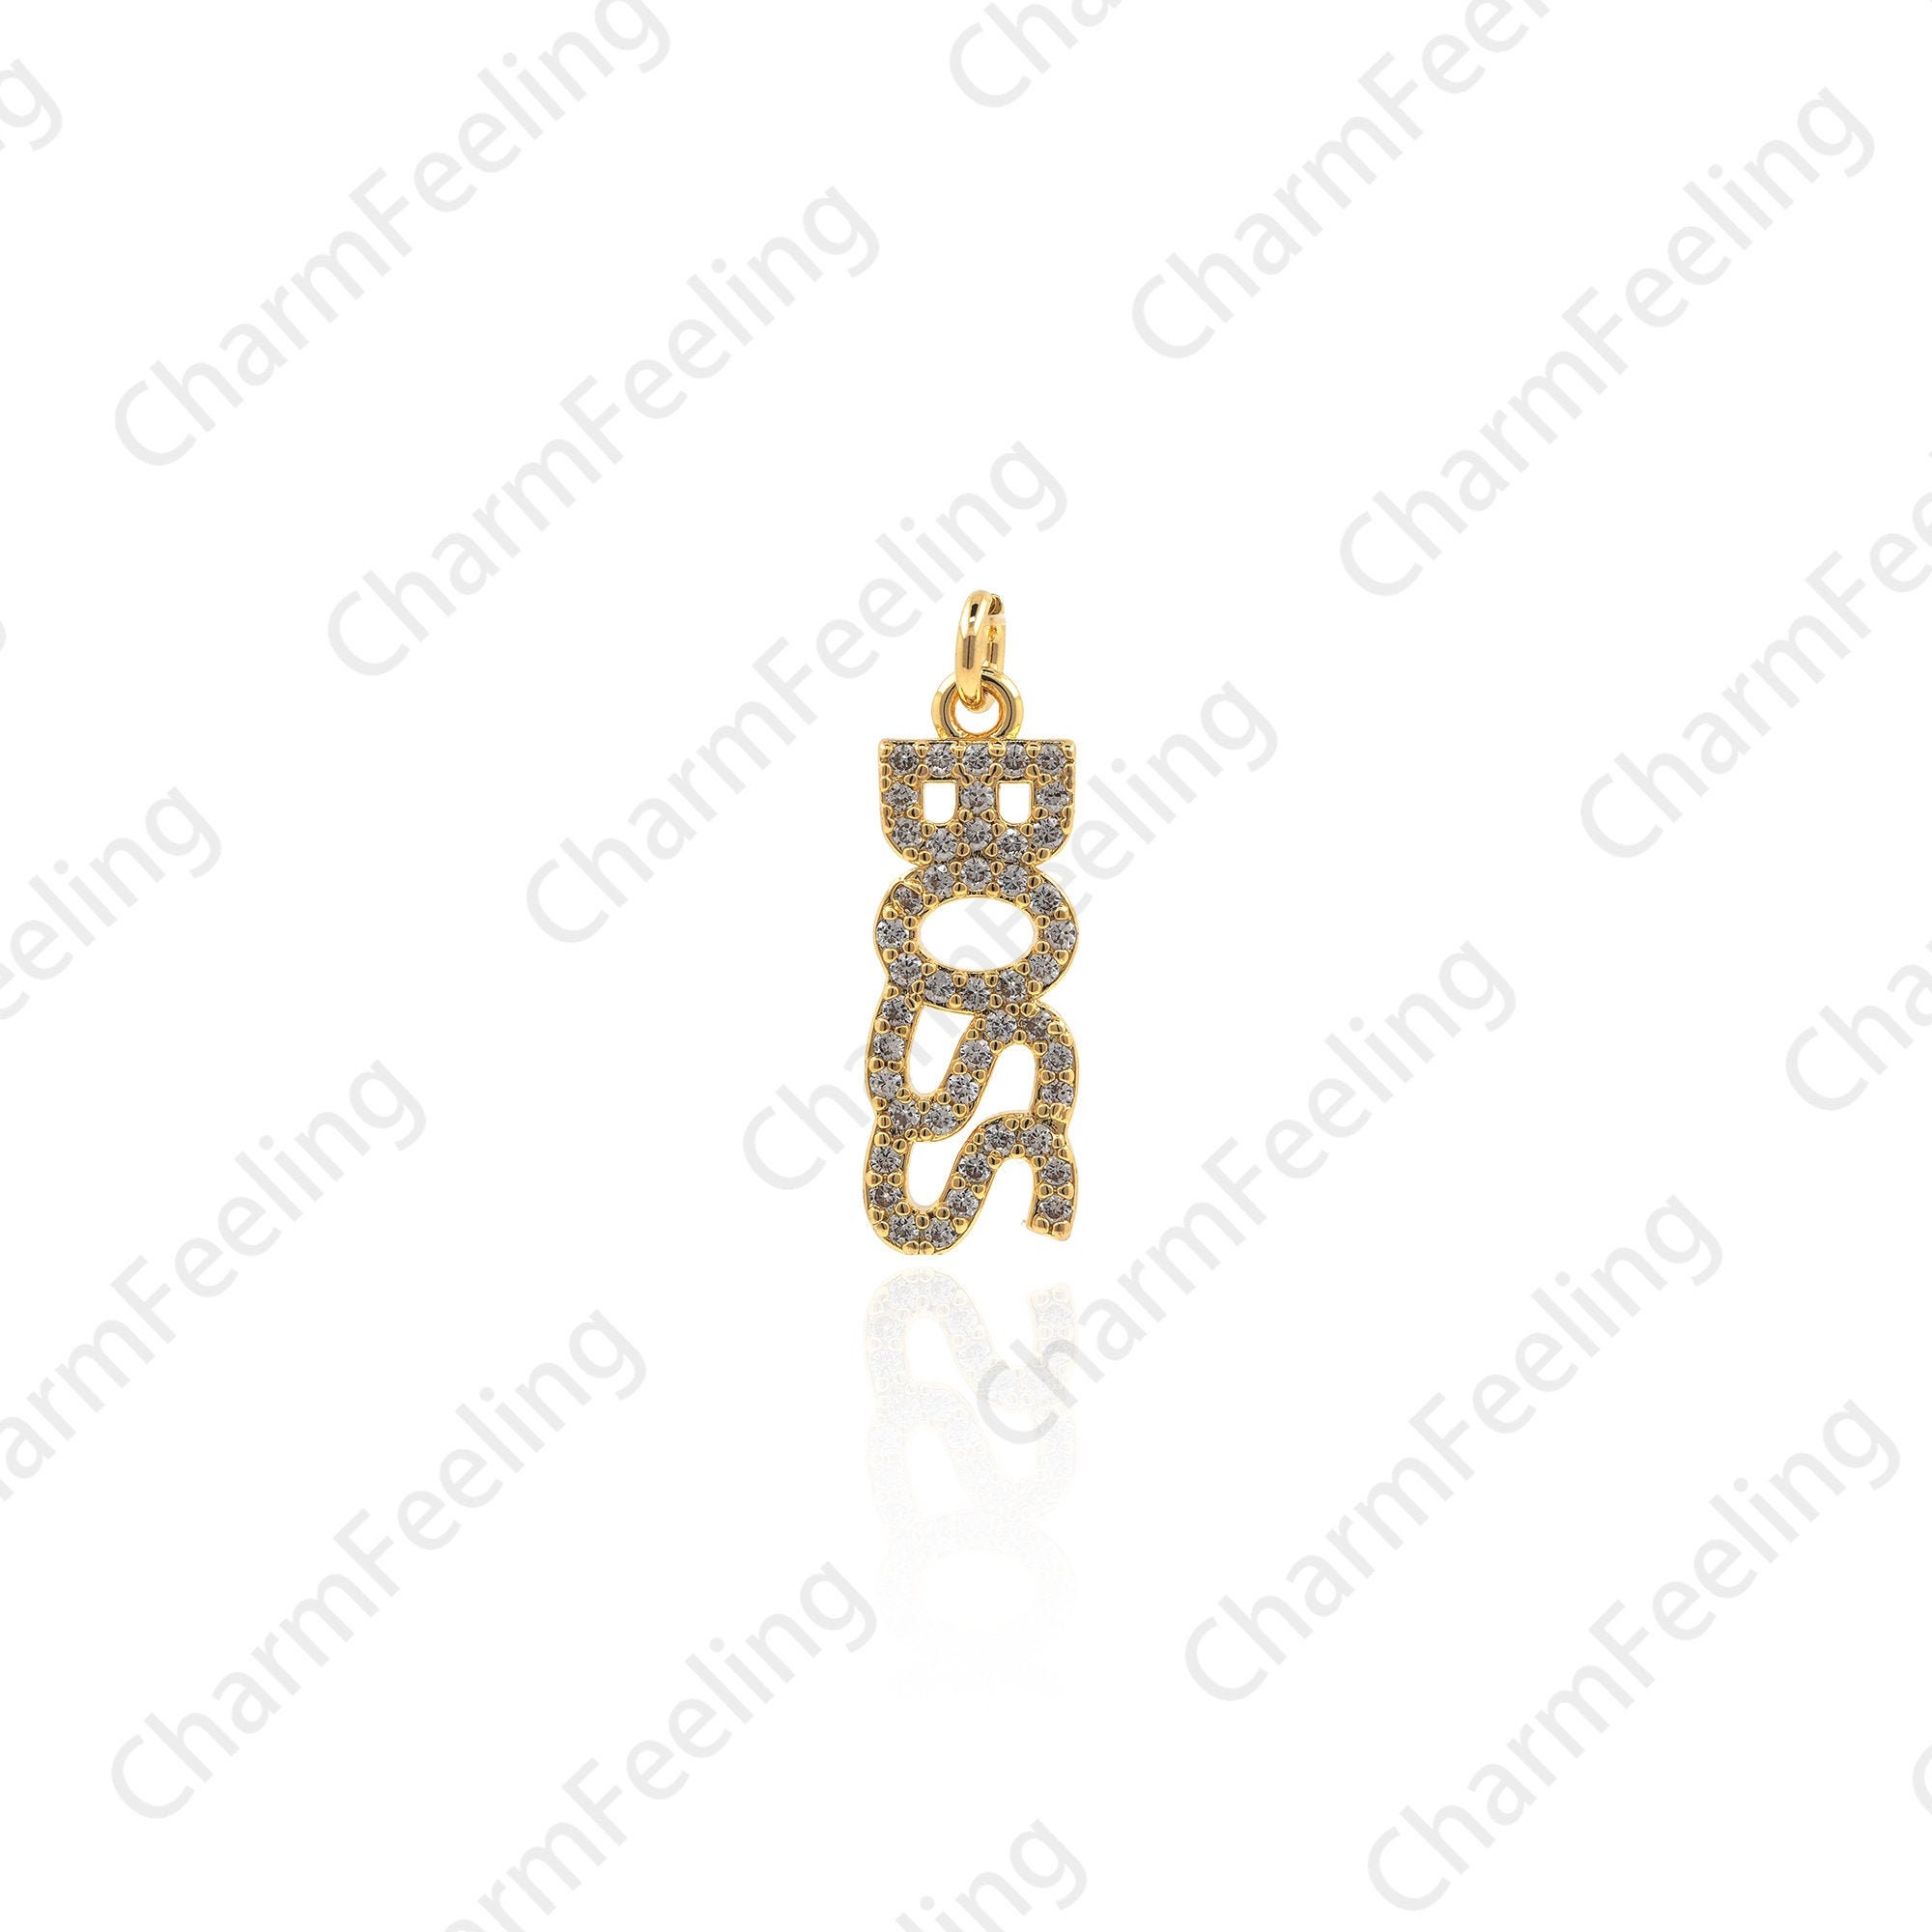 Micropav Cz Necklace, 18K Gold Filled Boss Pendant, English Character Diy Jewelry Component 22x7x1.8mm